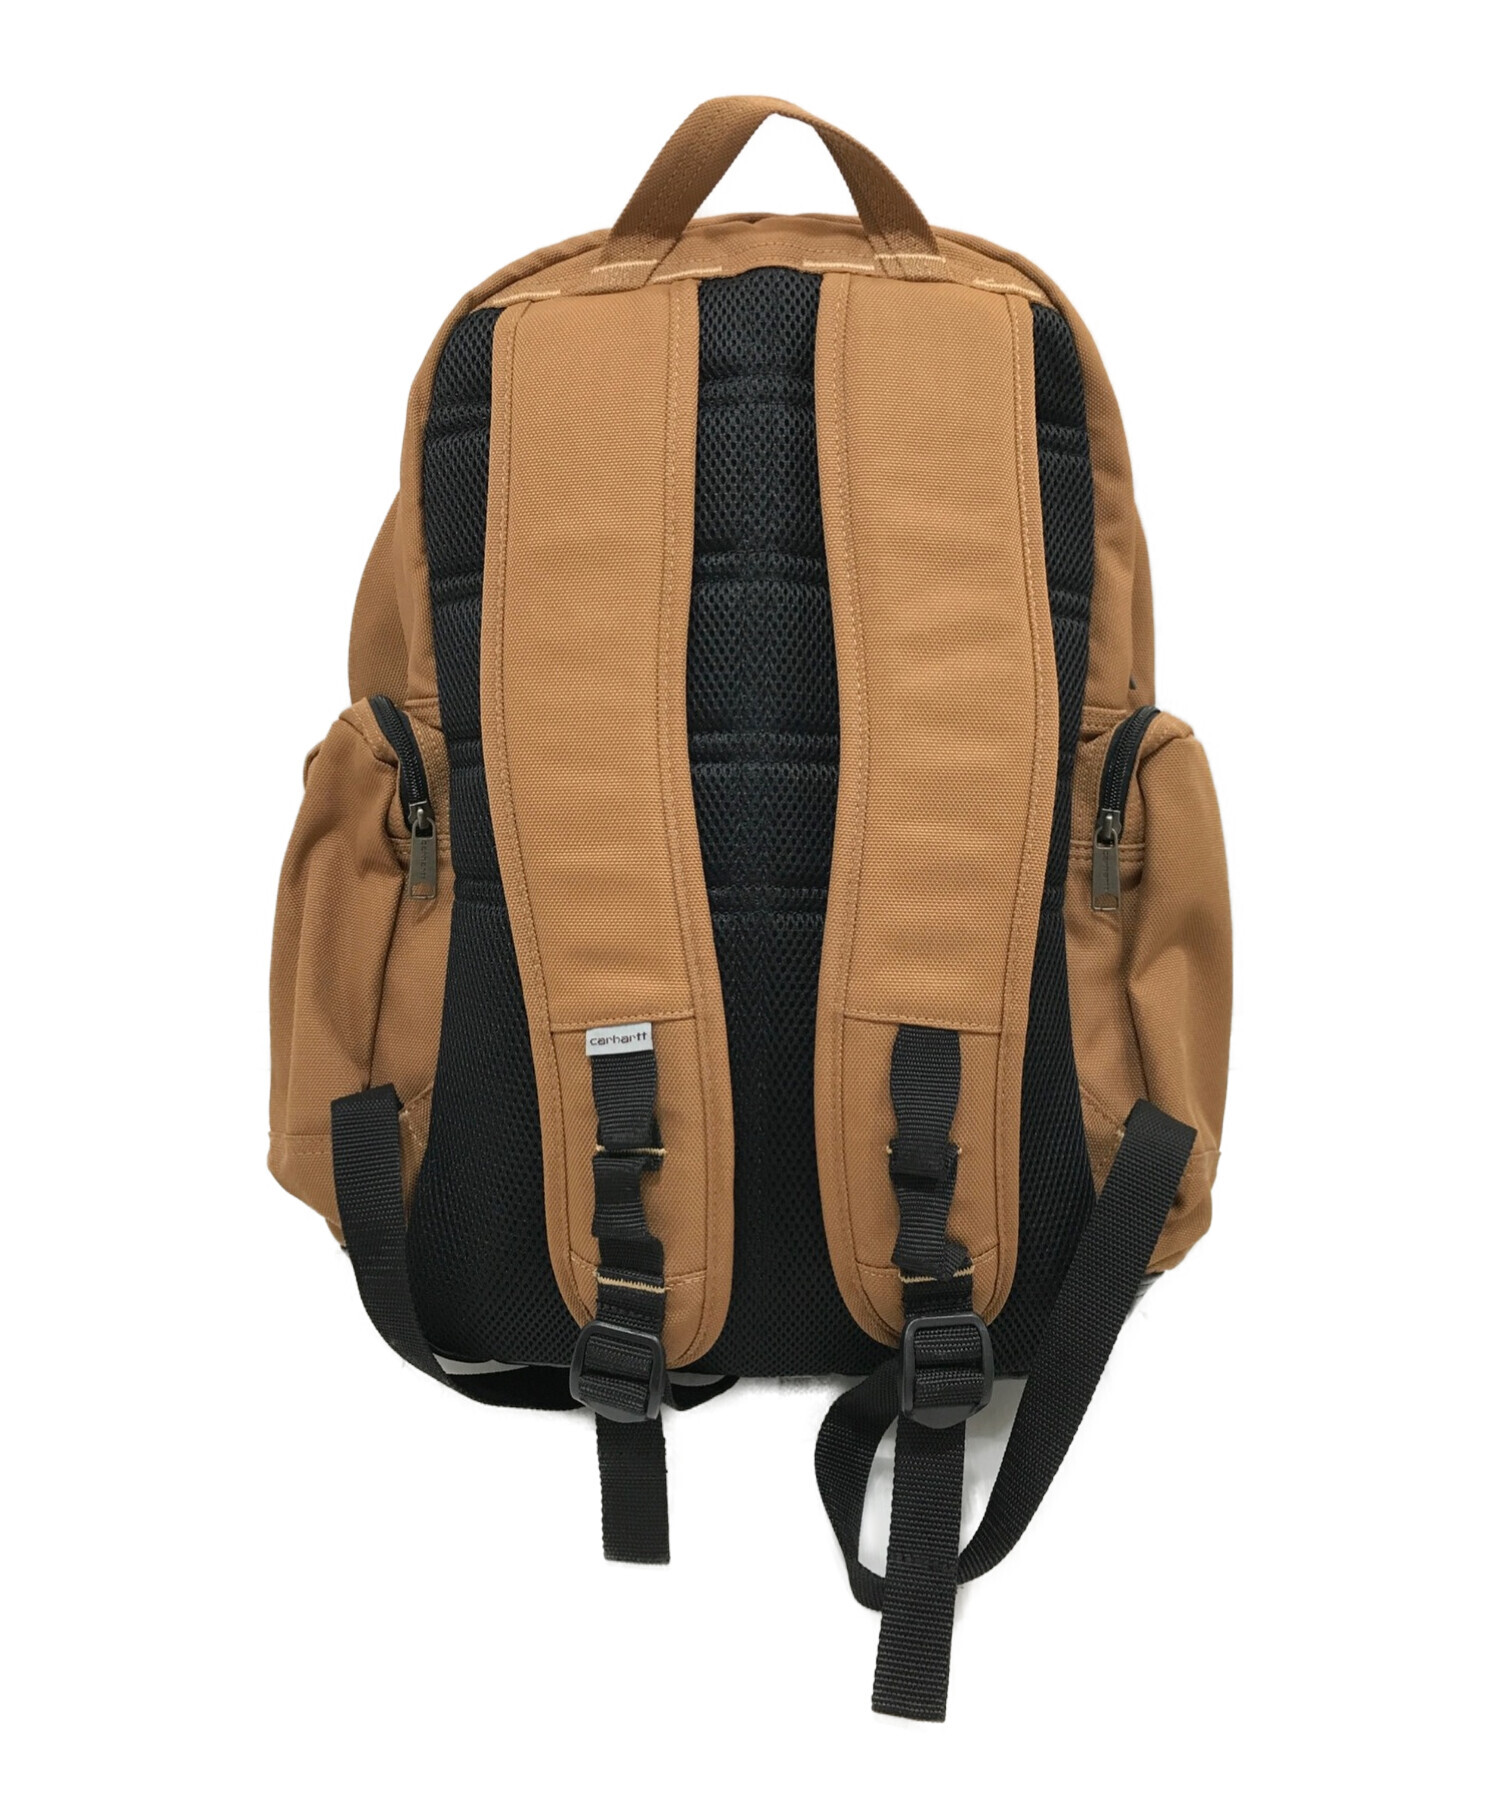 CarHartt (カーハート) Legacy deluxe work pack ベージュ